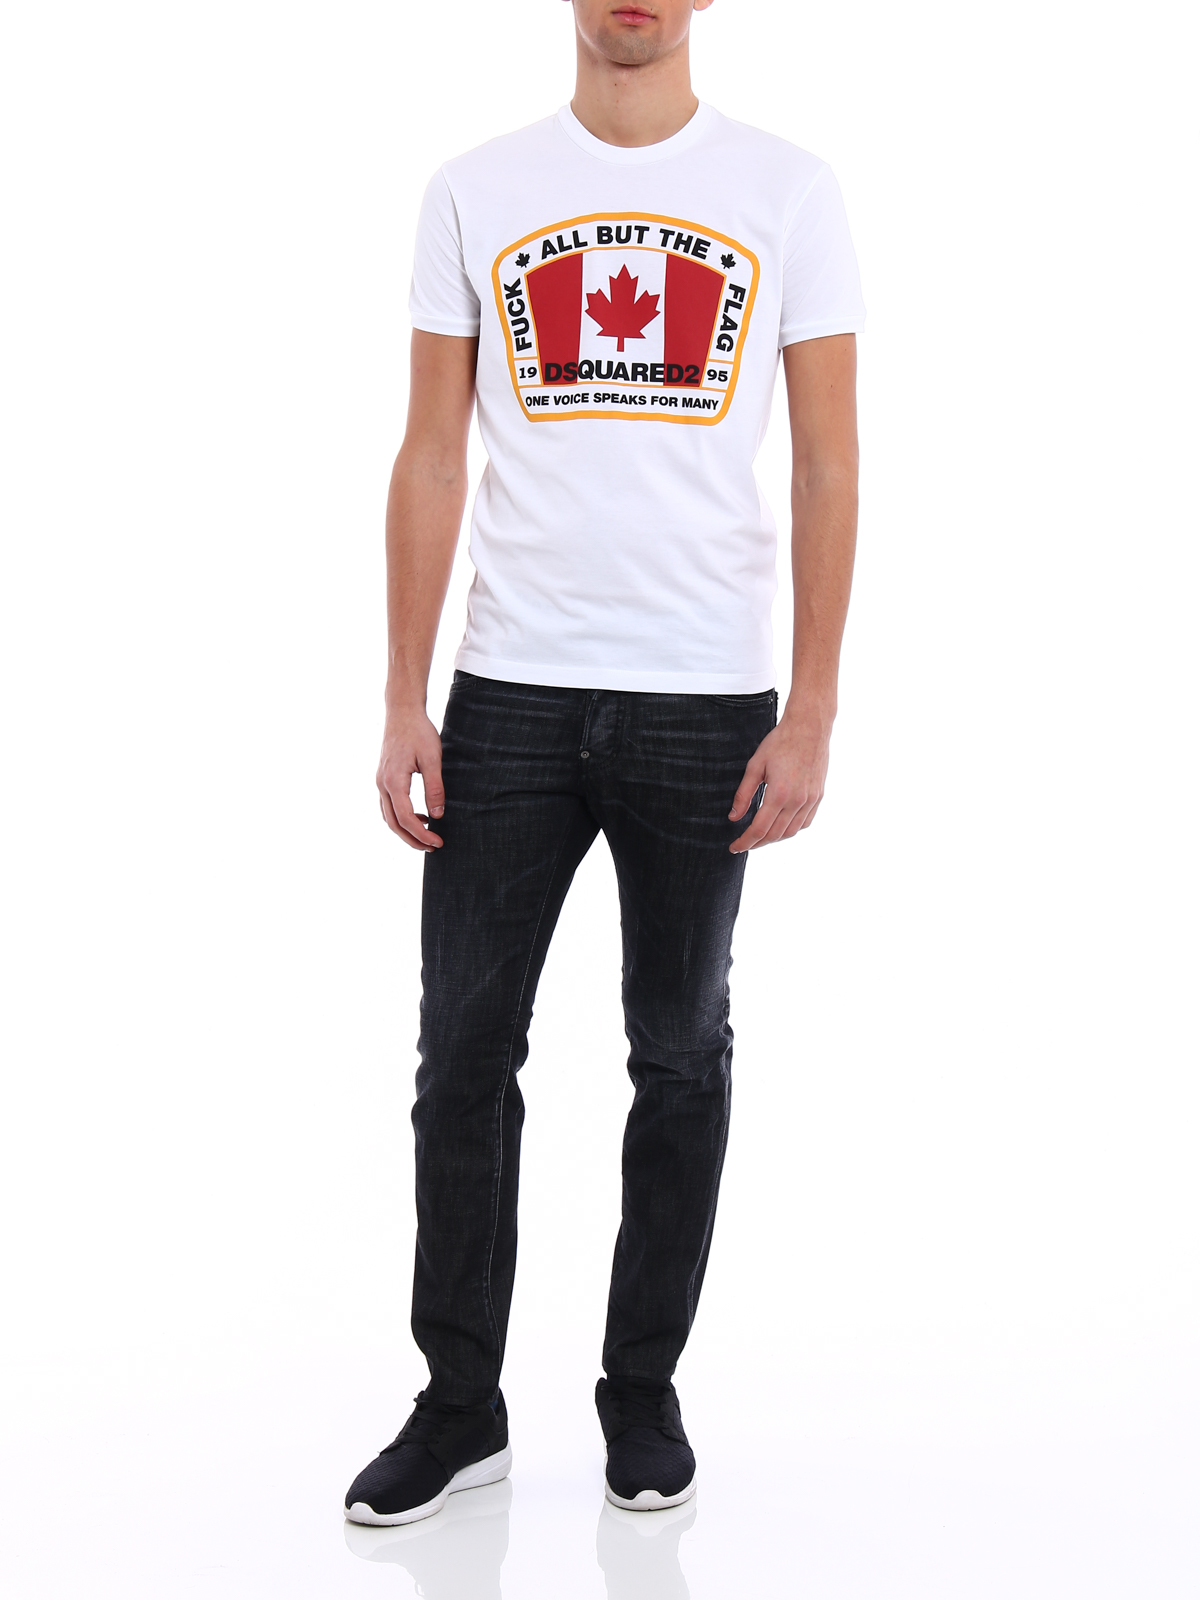 dsquared t shirt all but the flag